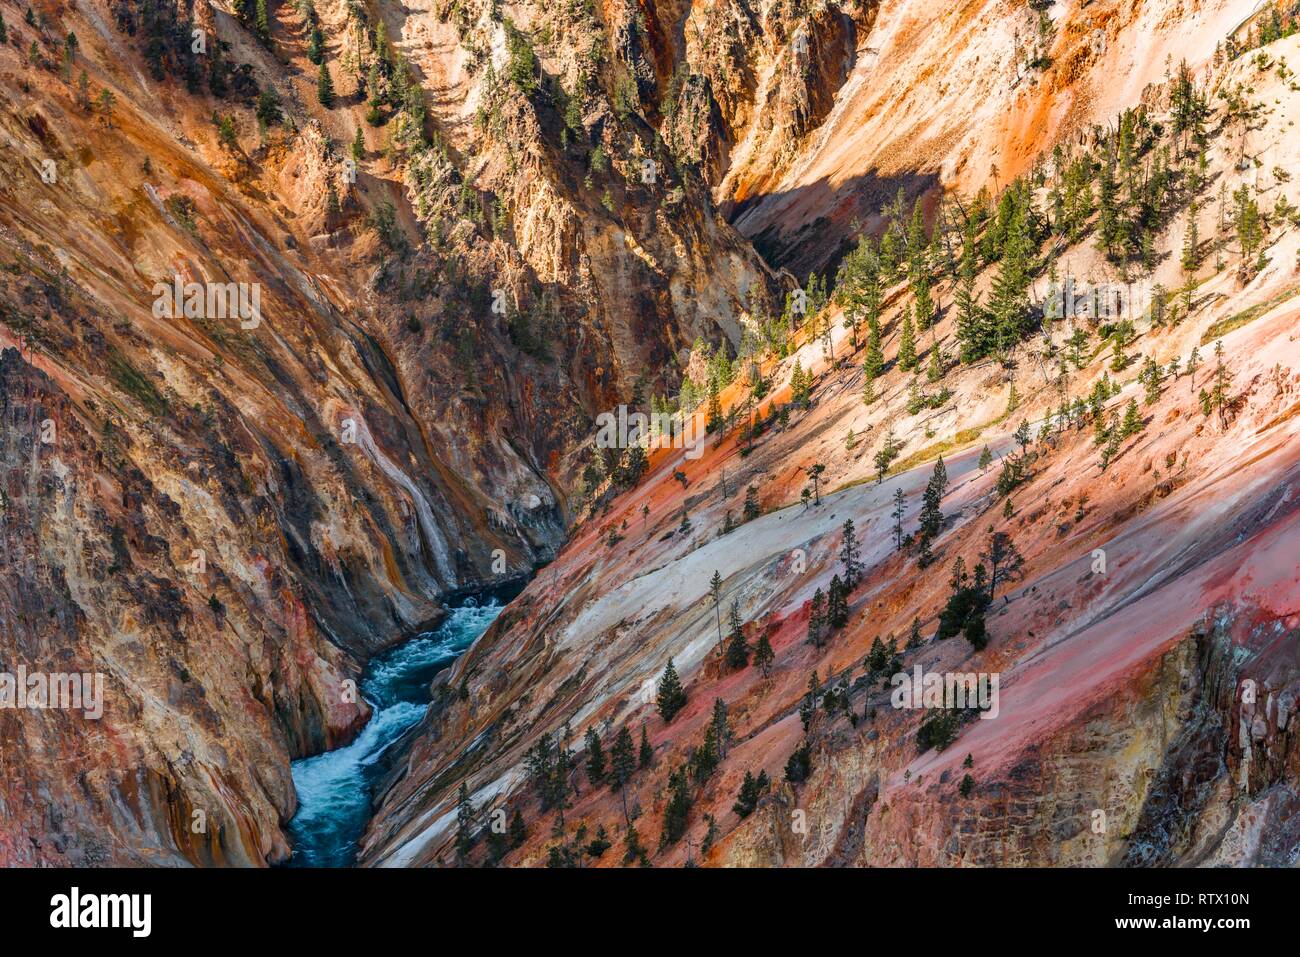 River Yellowstone River fließt durch Canyon, Grand Canyon, Yellowstone, Grand View, Yellowstone National Park, Wyoming Stockfoto